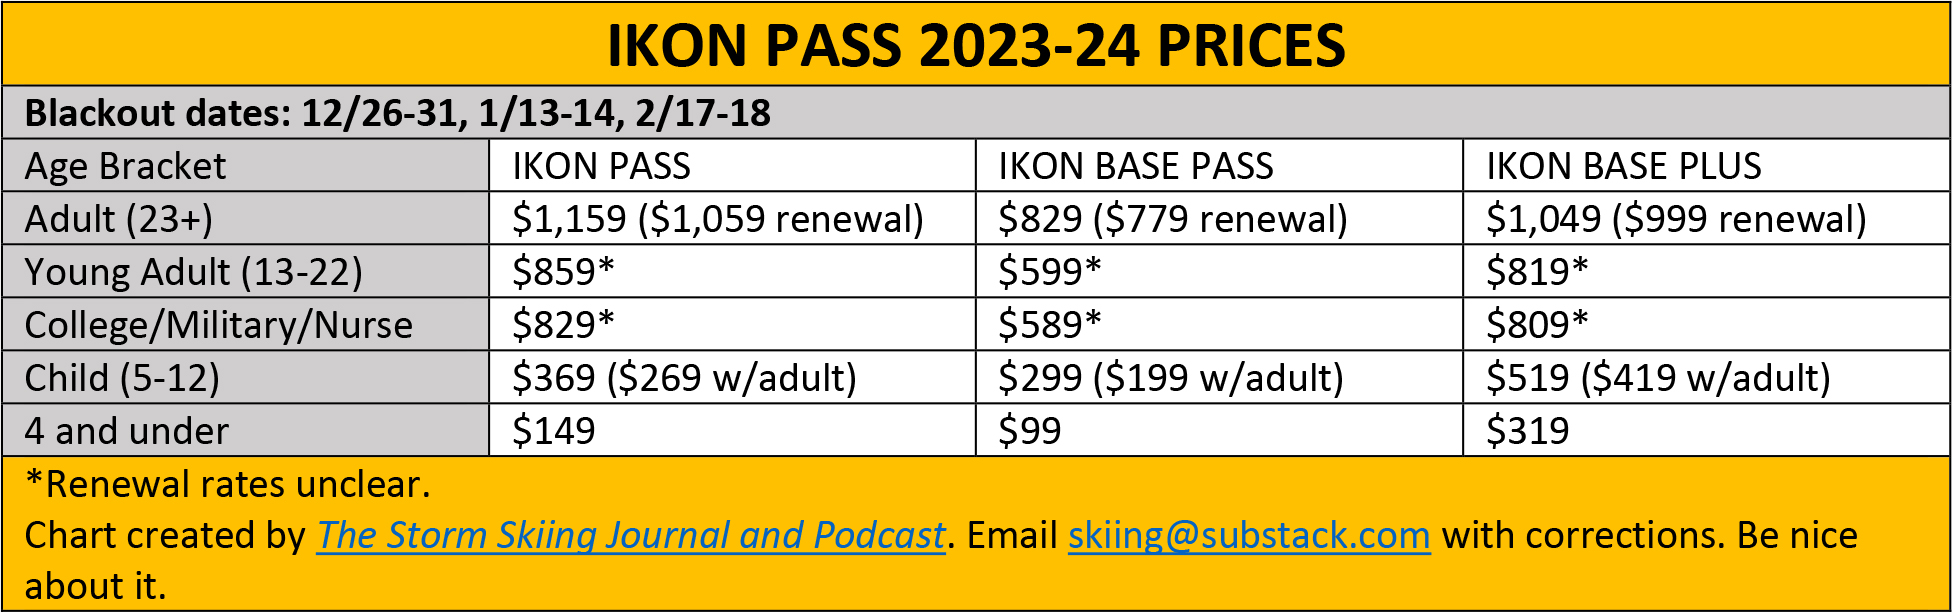 Taos Leaves Ikon Base for Base Plus for 202324; Prices Tick Upward to